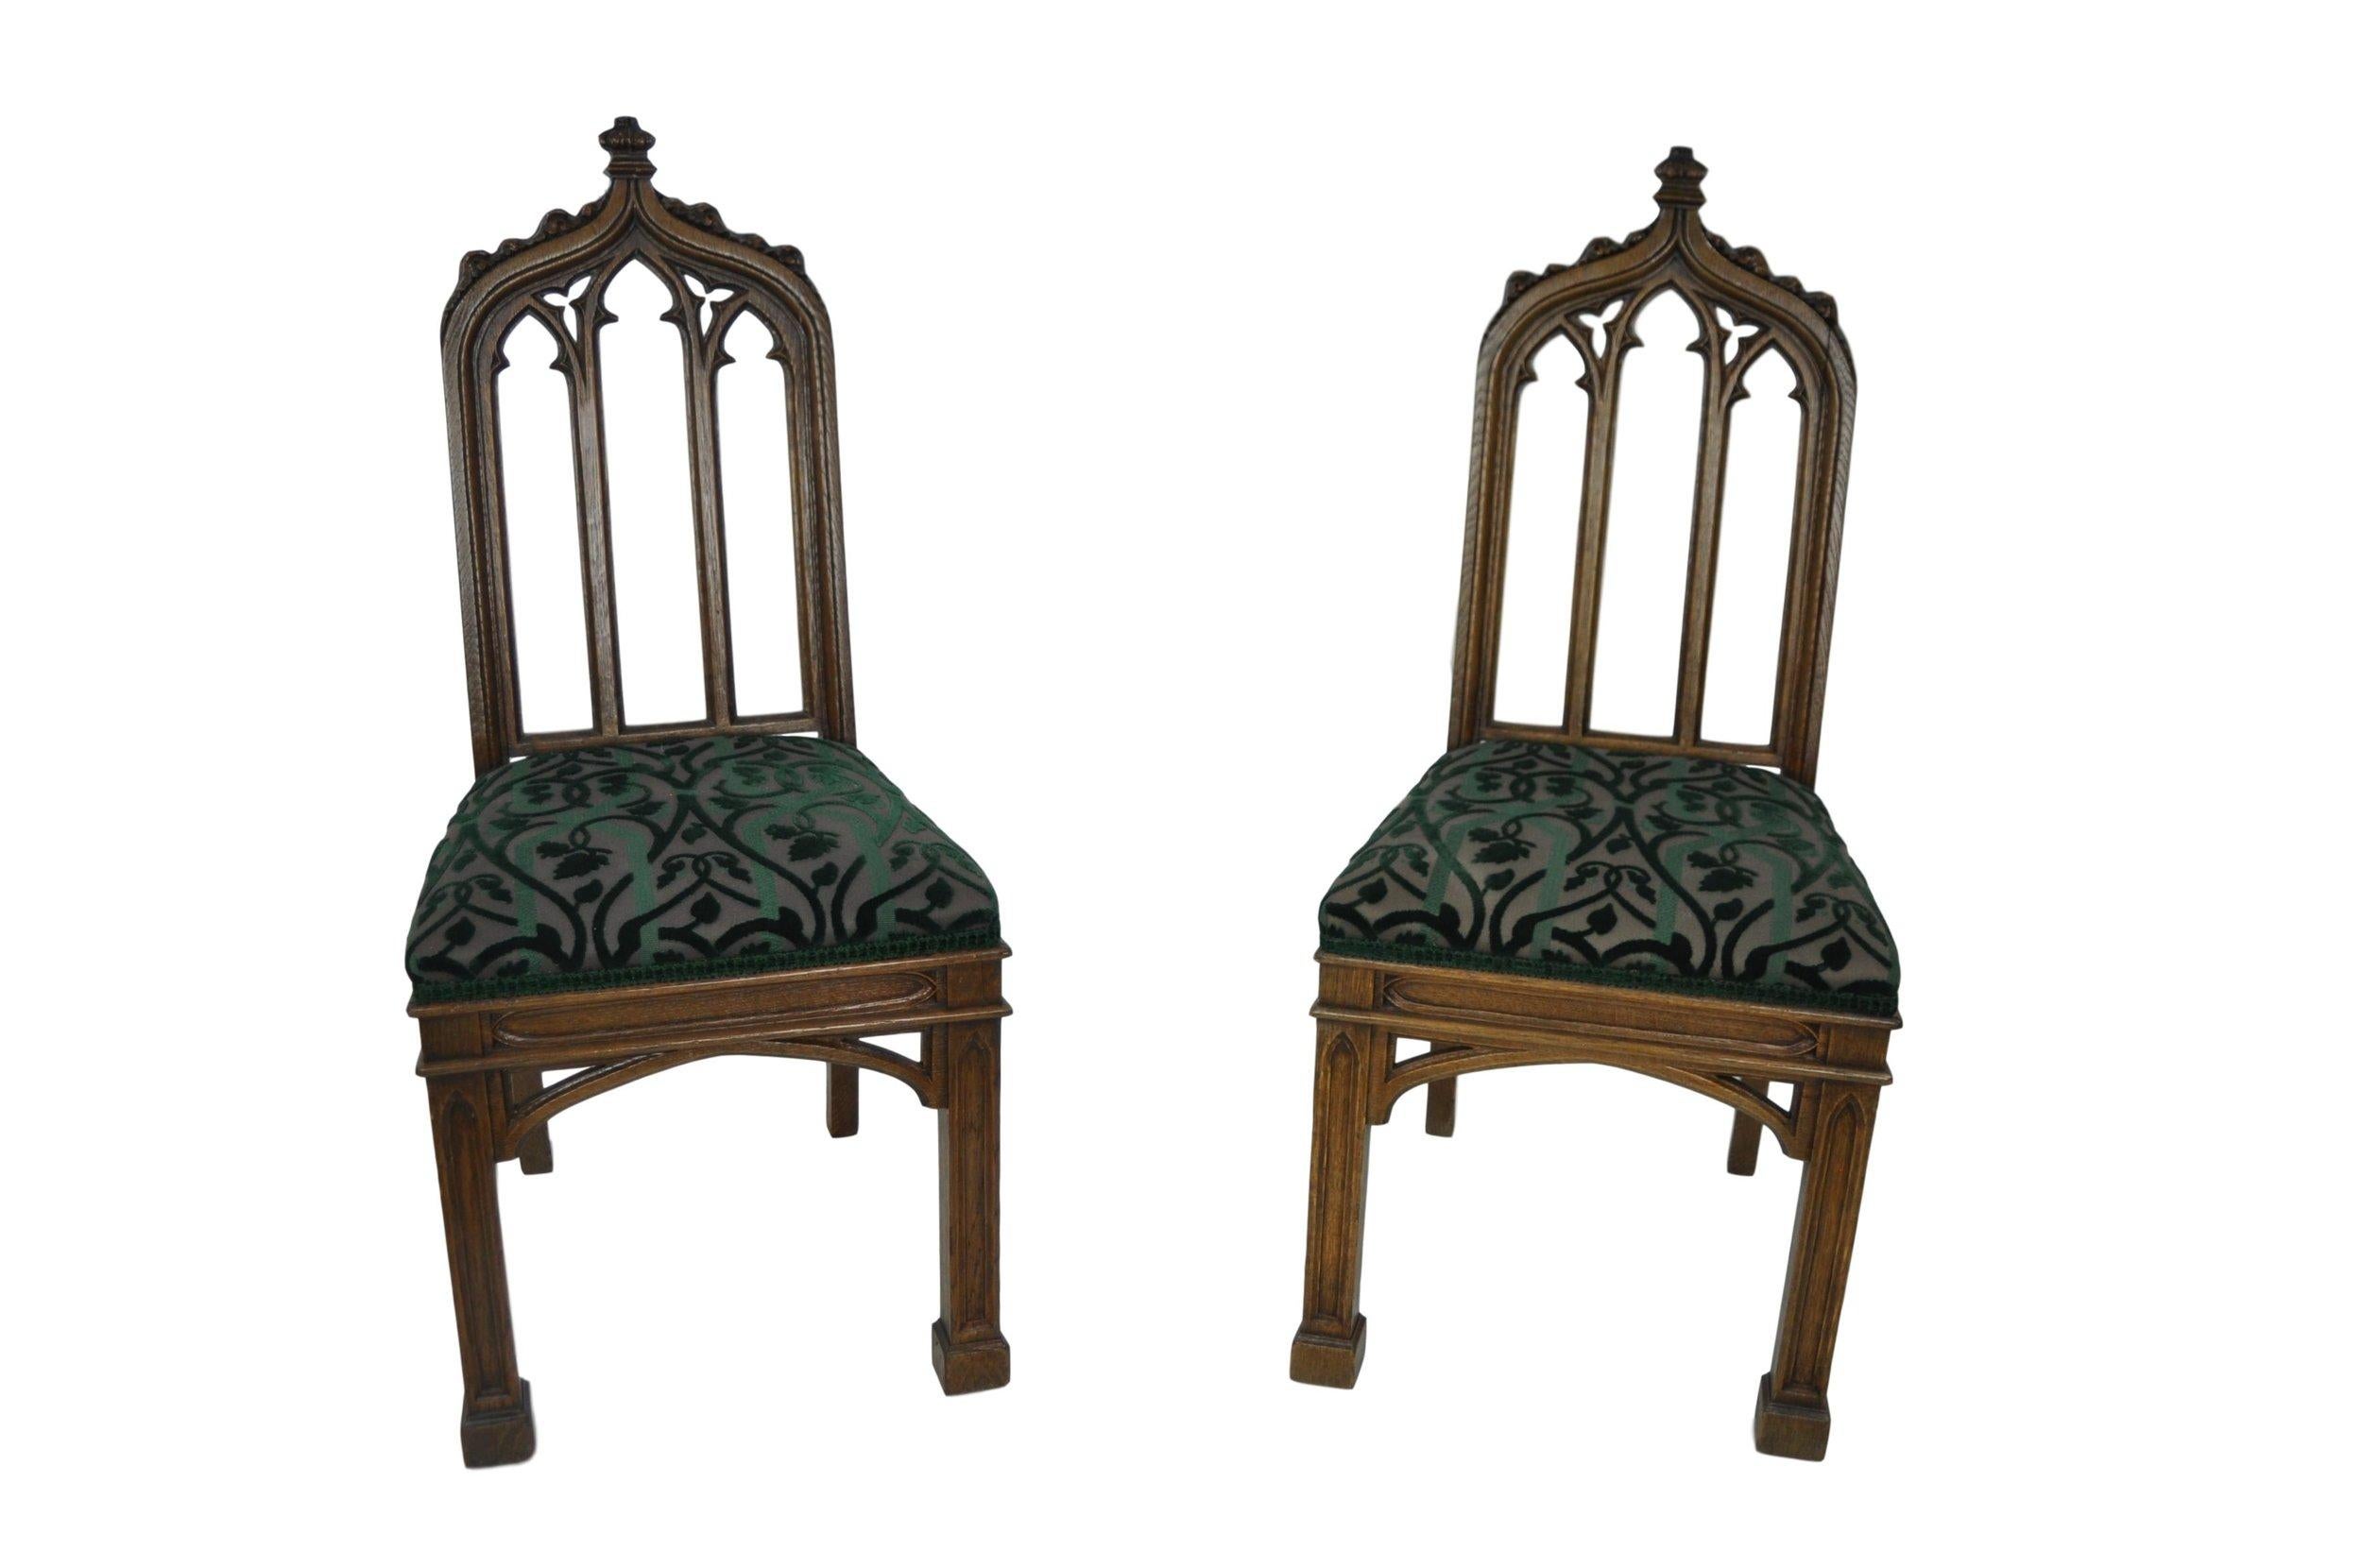 Beautiful set of six 19th century Gothic Revival dining room chairs in velvet green ivy upholstery.